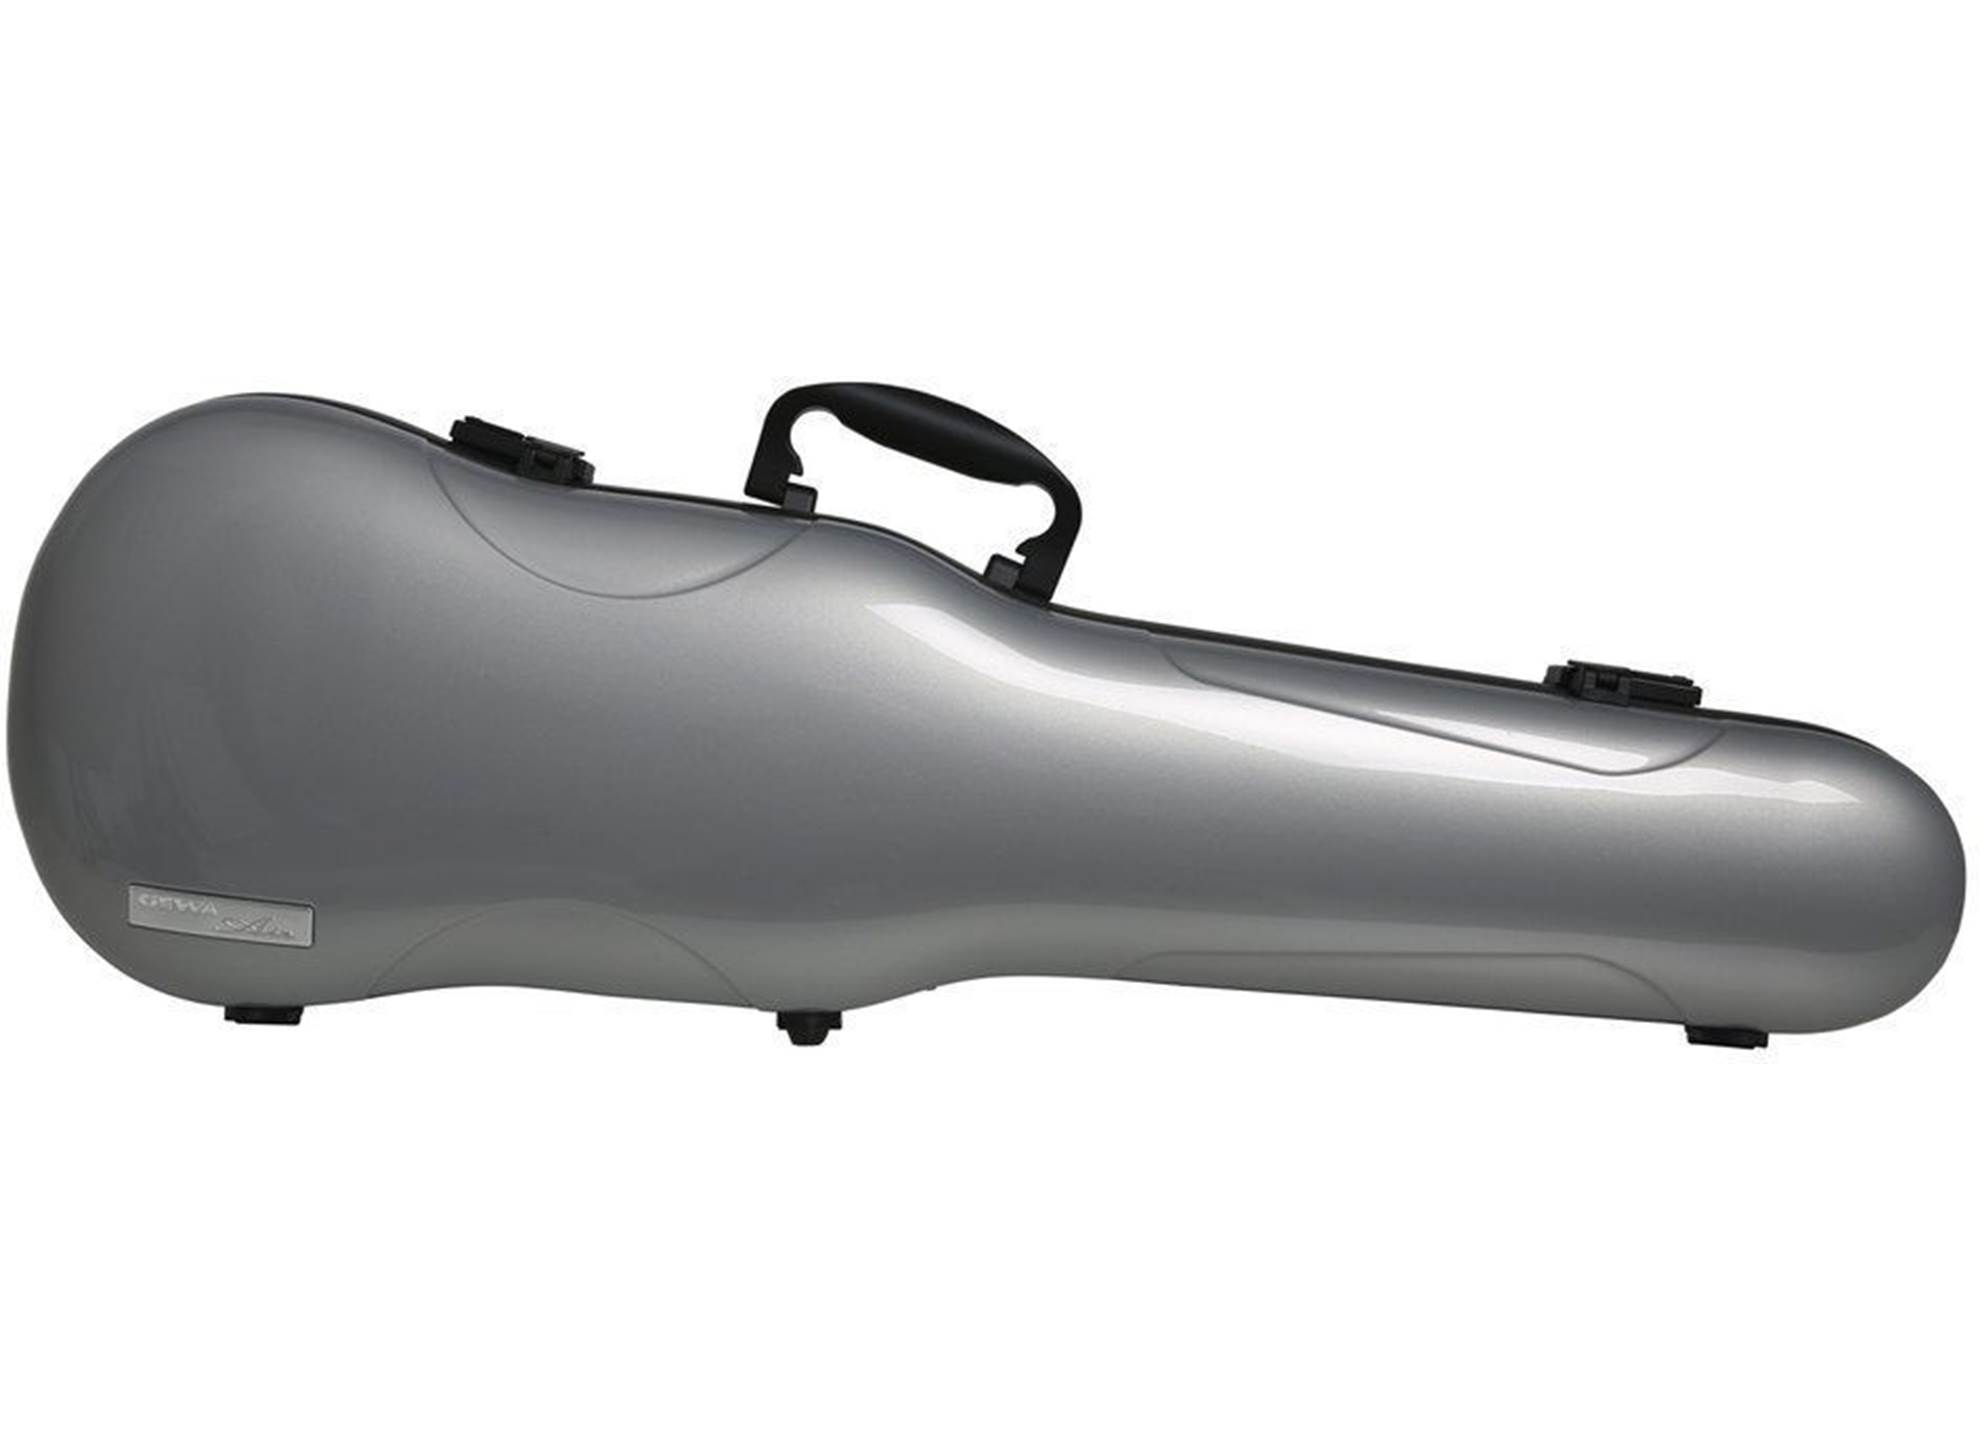 Form shaped violin cases Air 1.7 Silver Metallic